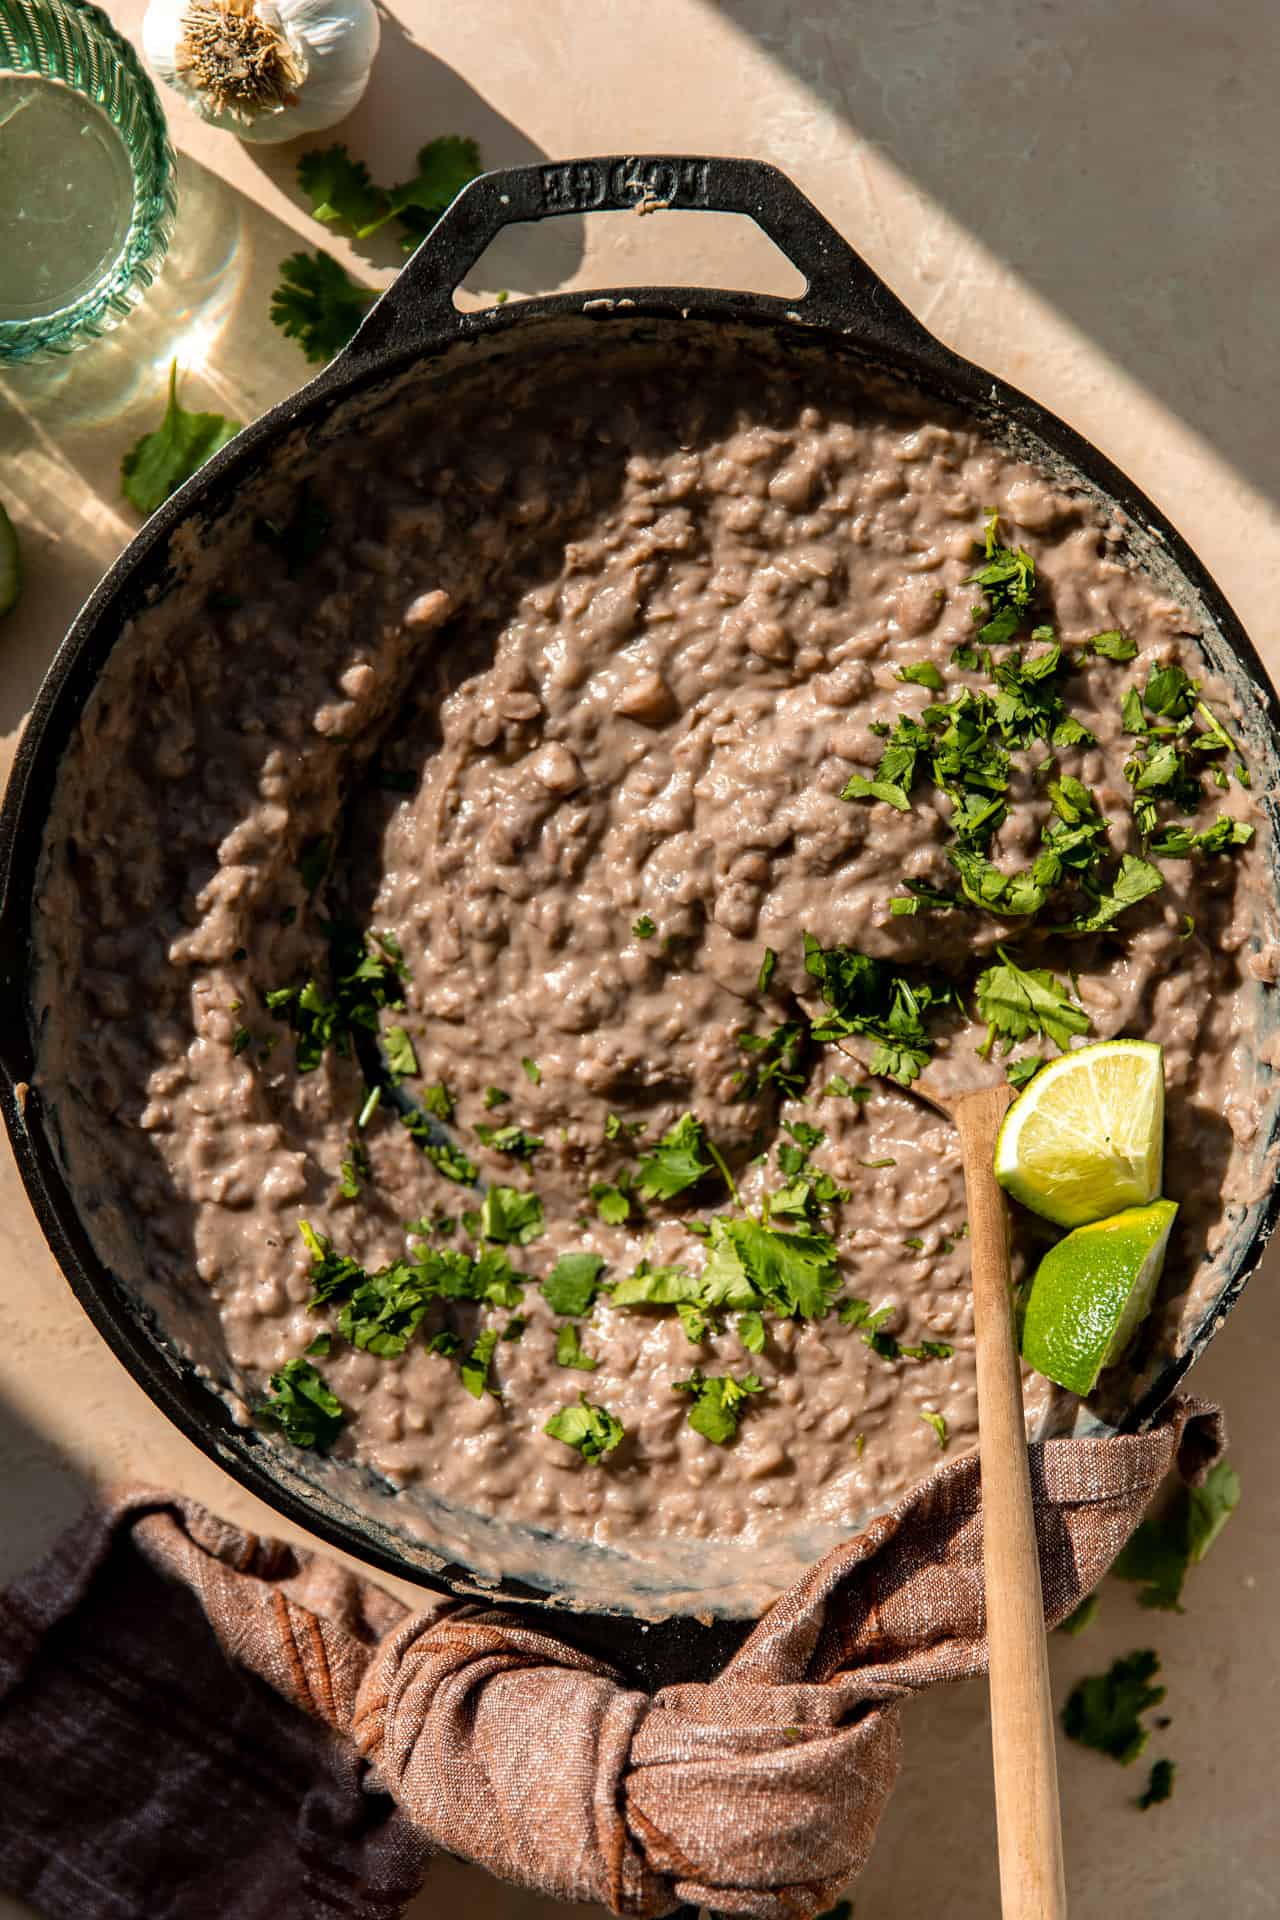 Skillet filled with refried beans, topped with cilantro and lime wedges. 